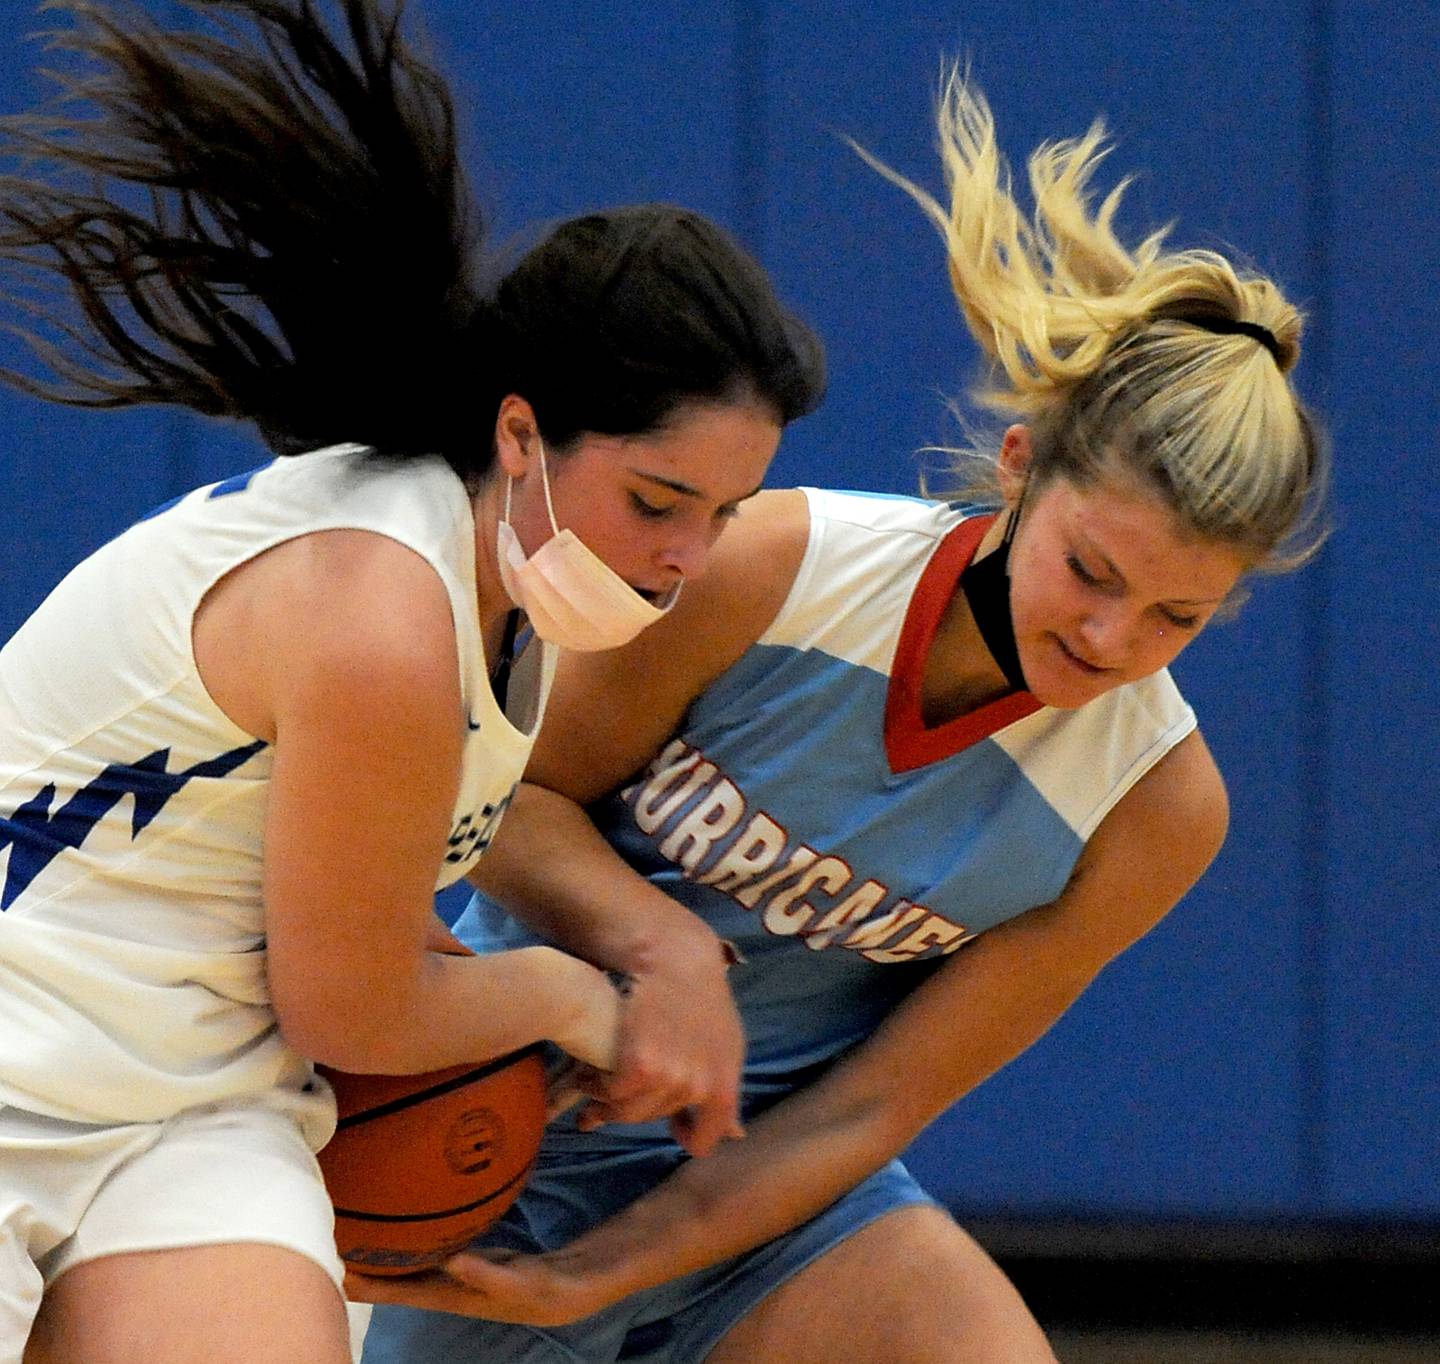 Woodstock’s Natalie Morrow tries to keep Marian Central’s Madison Kenyon from taking the ball away from her during first quarter of a basketball game in the Johnsburg Girls Basketball Thanksgiving Tournament Monday evening, Nov. 15, 2021, at Johnsburg High School.